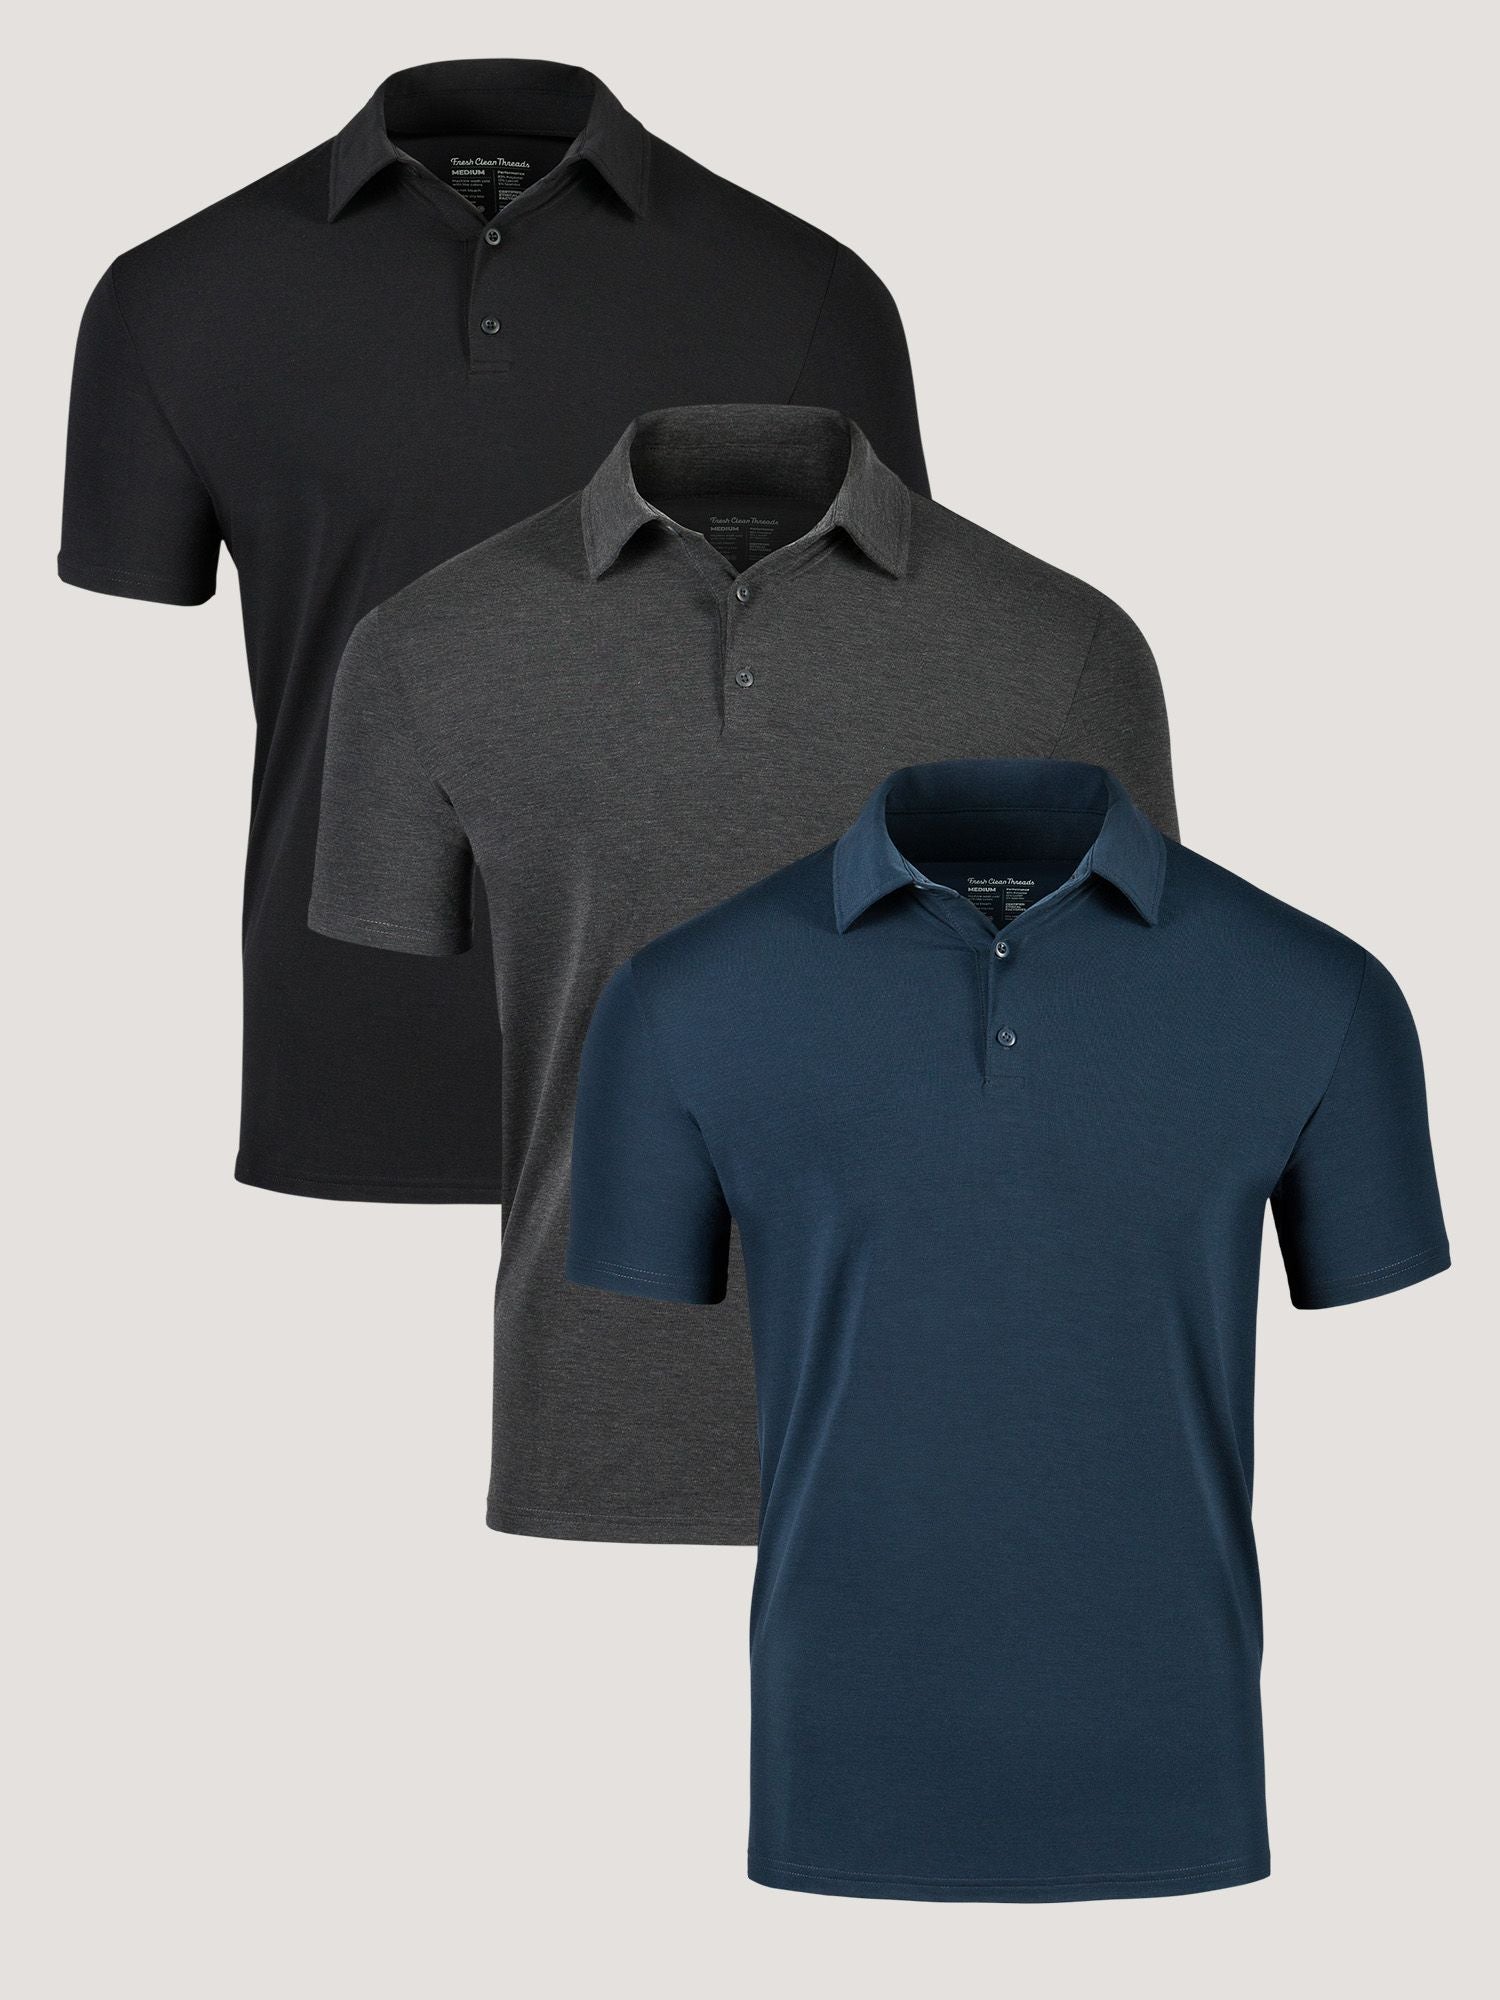 Foundation Performance Polo 3-pack | Fresh Clean Threads